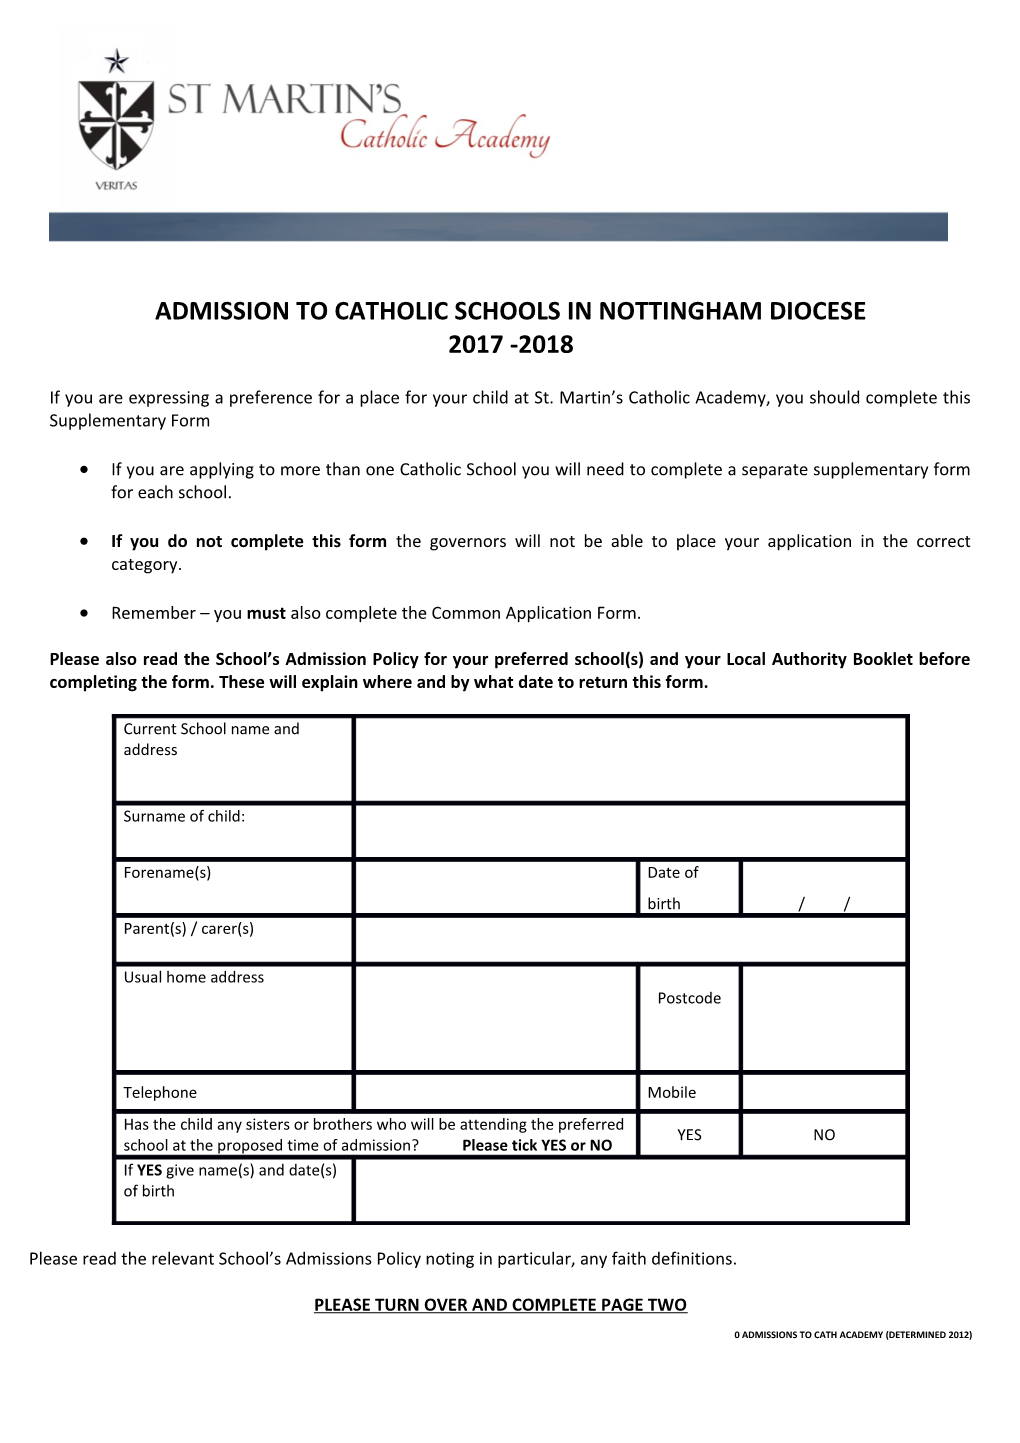 Admission to Catholic Schools in Nottingham Diocese